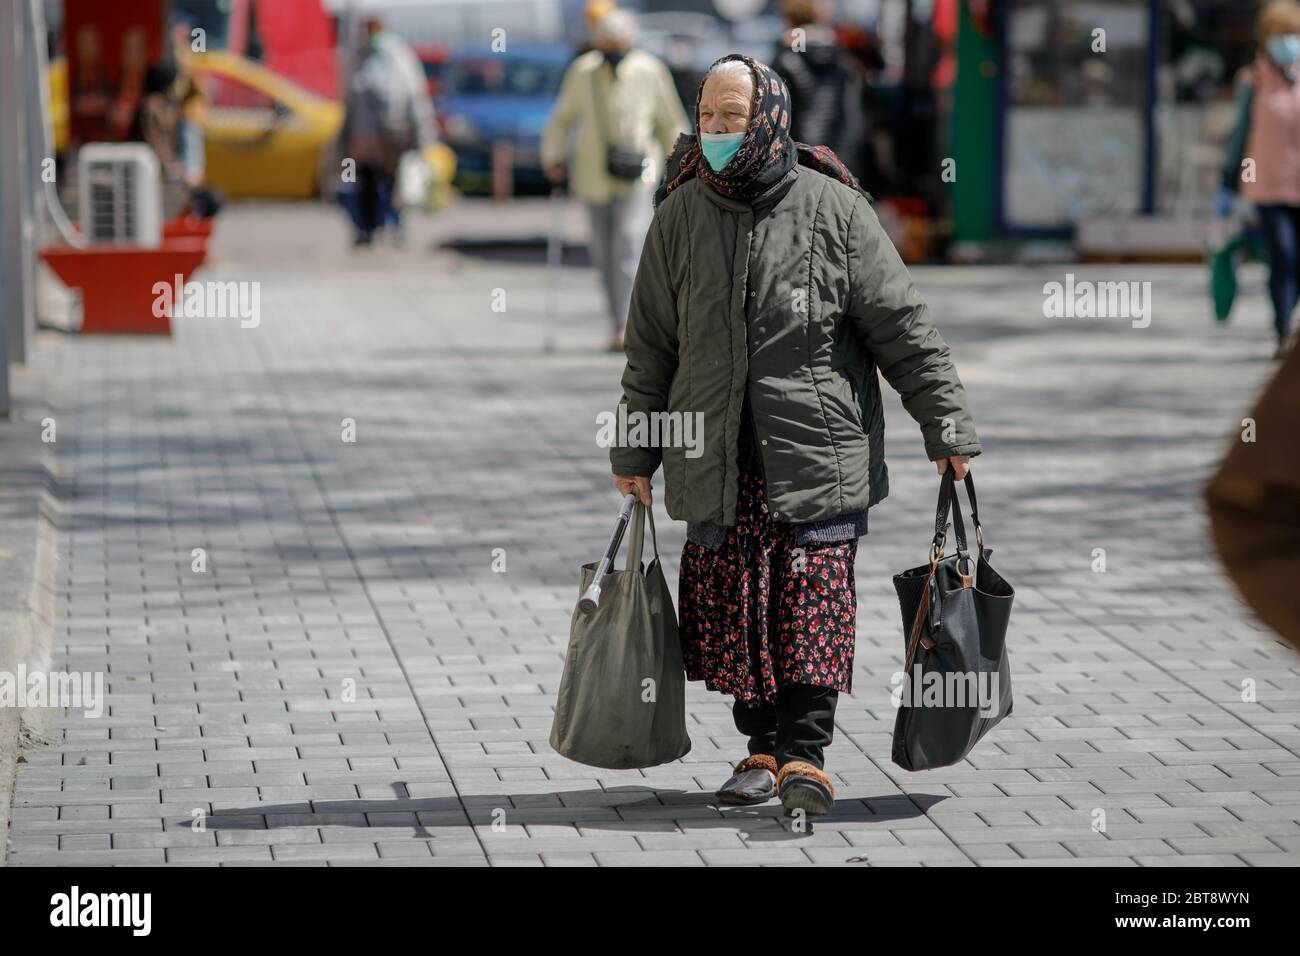 Bucharest, Romania - April 16, 2020: Old people wearing protective masks do their shopping in a busy open market in Bucharest during covid-19 outbreak Stock Photo